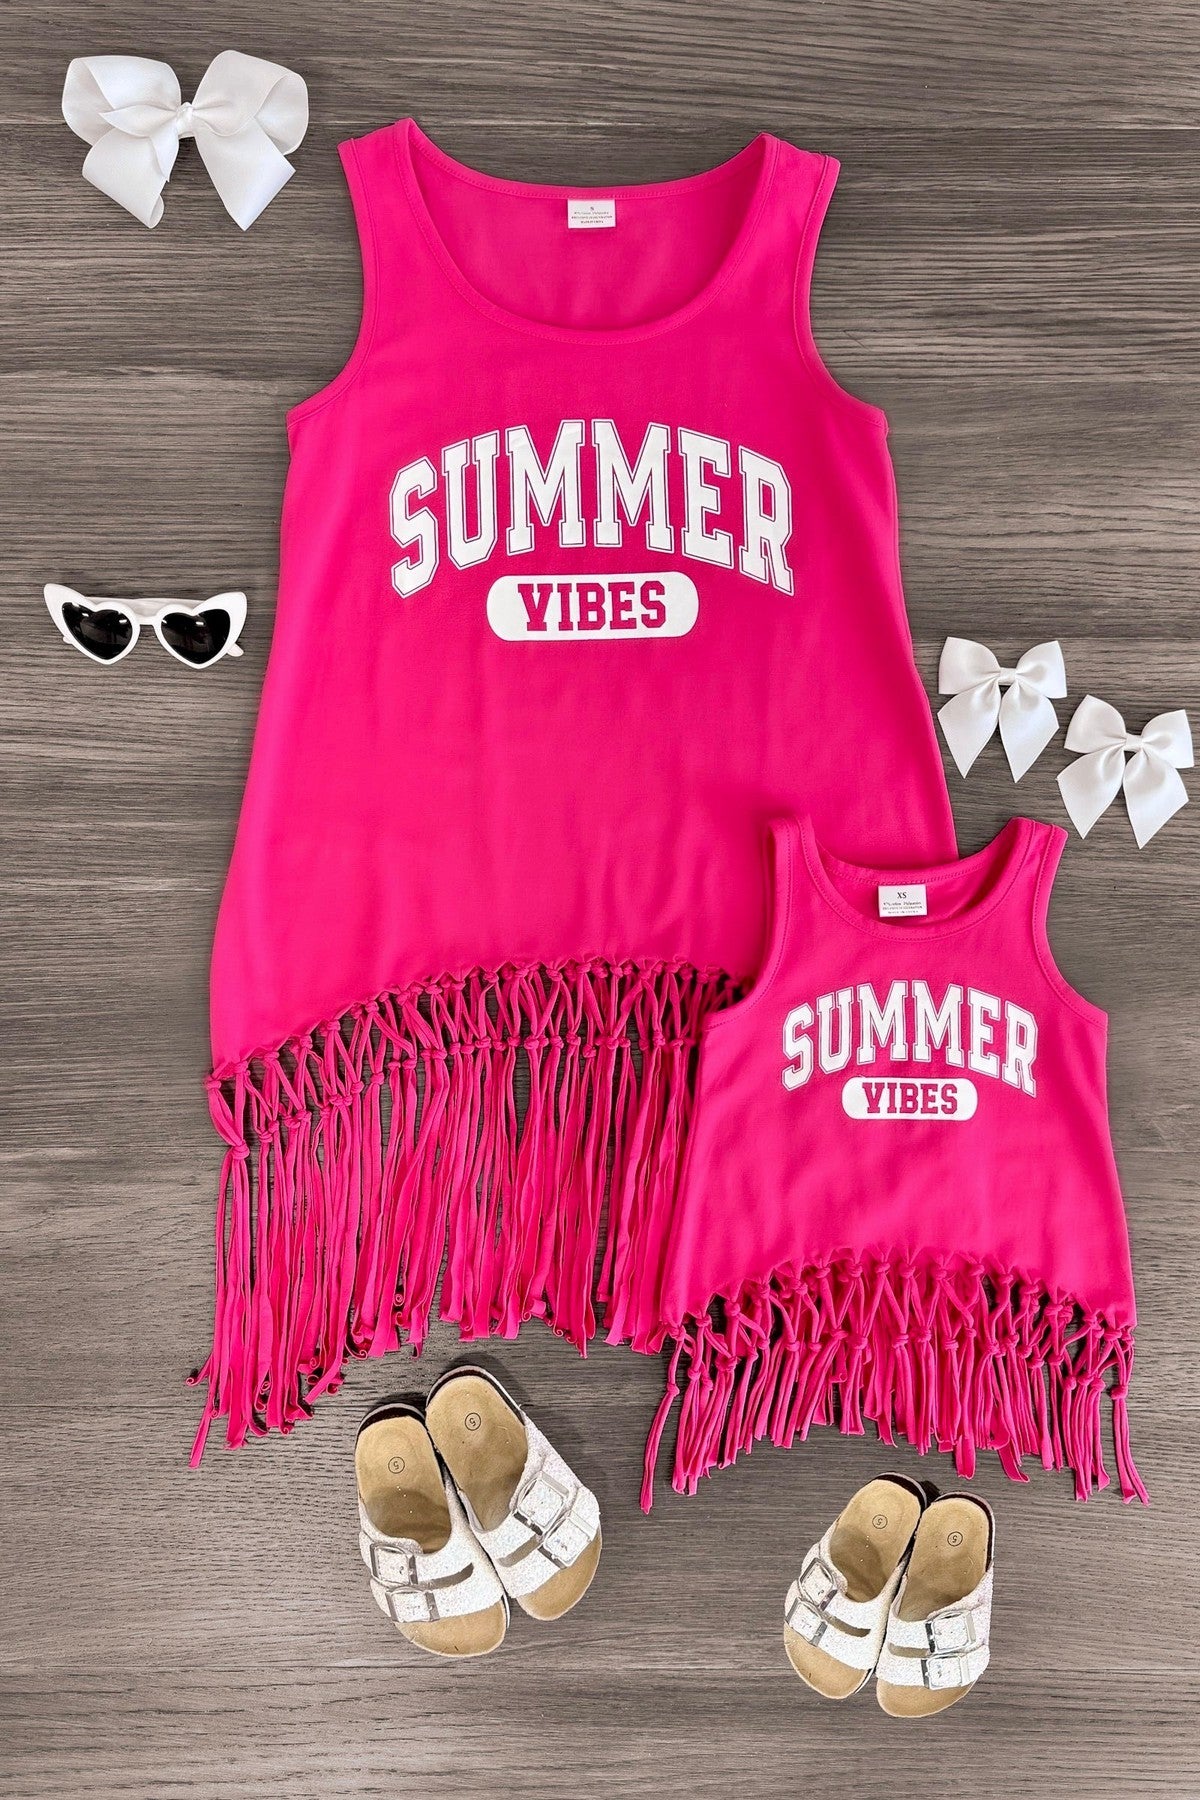 Mom & Me - "Summer Vibes" Hot Pink Tank Top - Sparkle in Pink